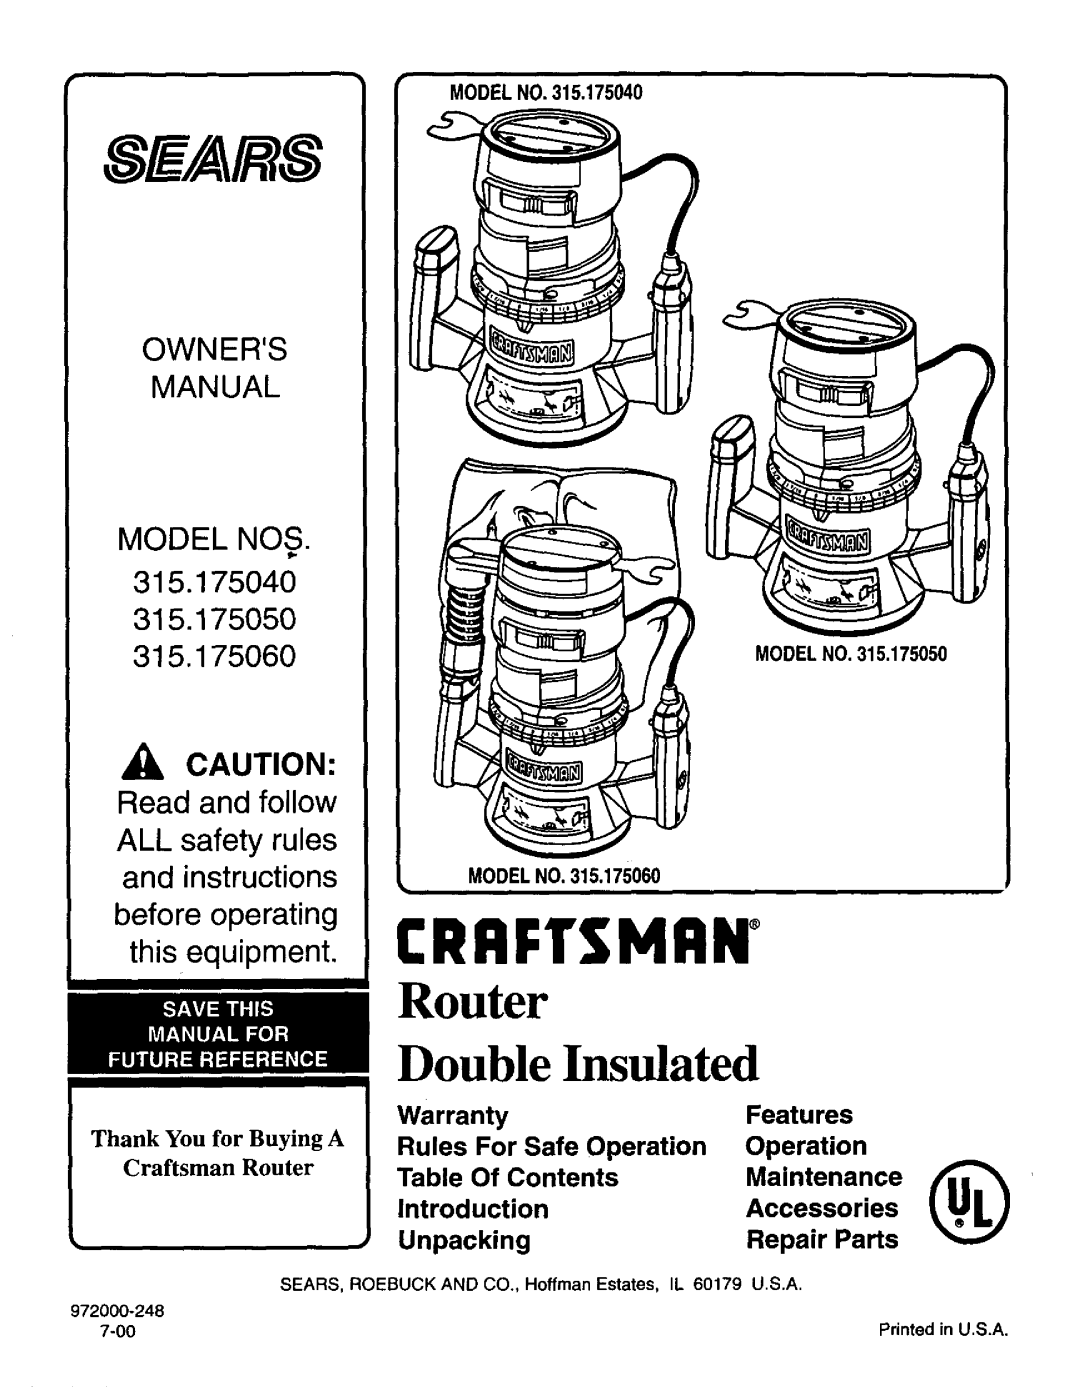 Sears owner manual OWNERS MANUAL MODEL NOS. 315.175040 315.175050, Read and follow ALL safety rules and instructions 